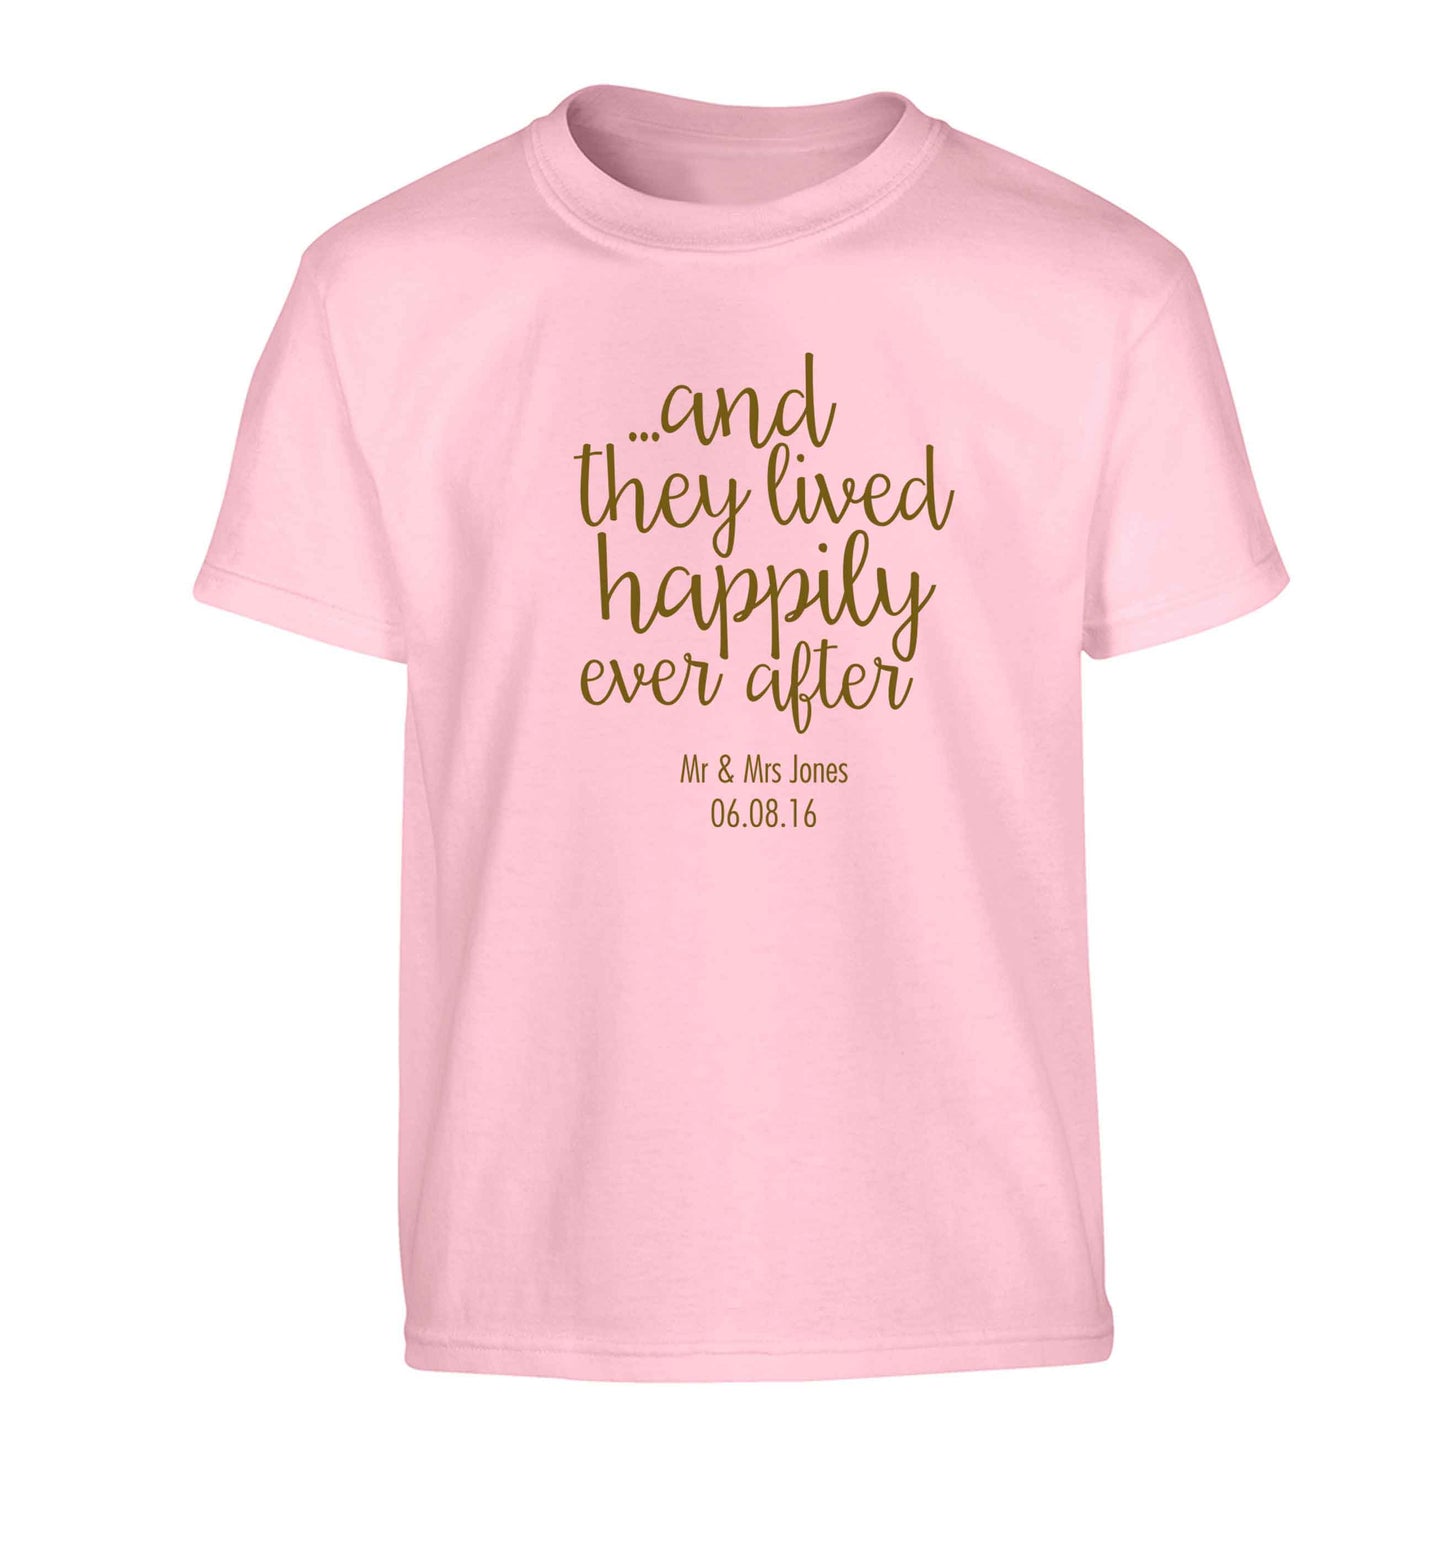 ...and they lived happily ever after - personalised date and names Children's light pink Tshirt 12-13 Years